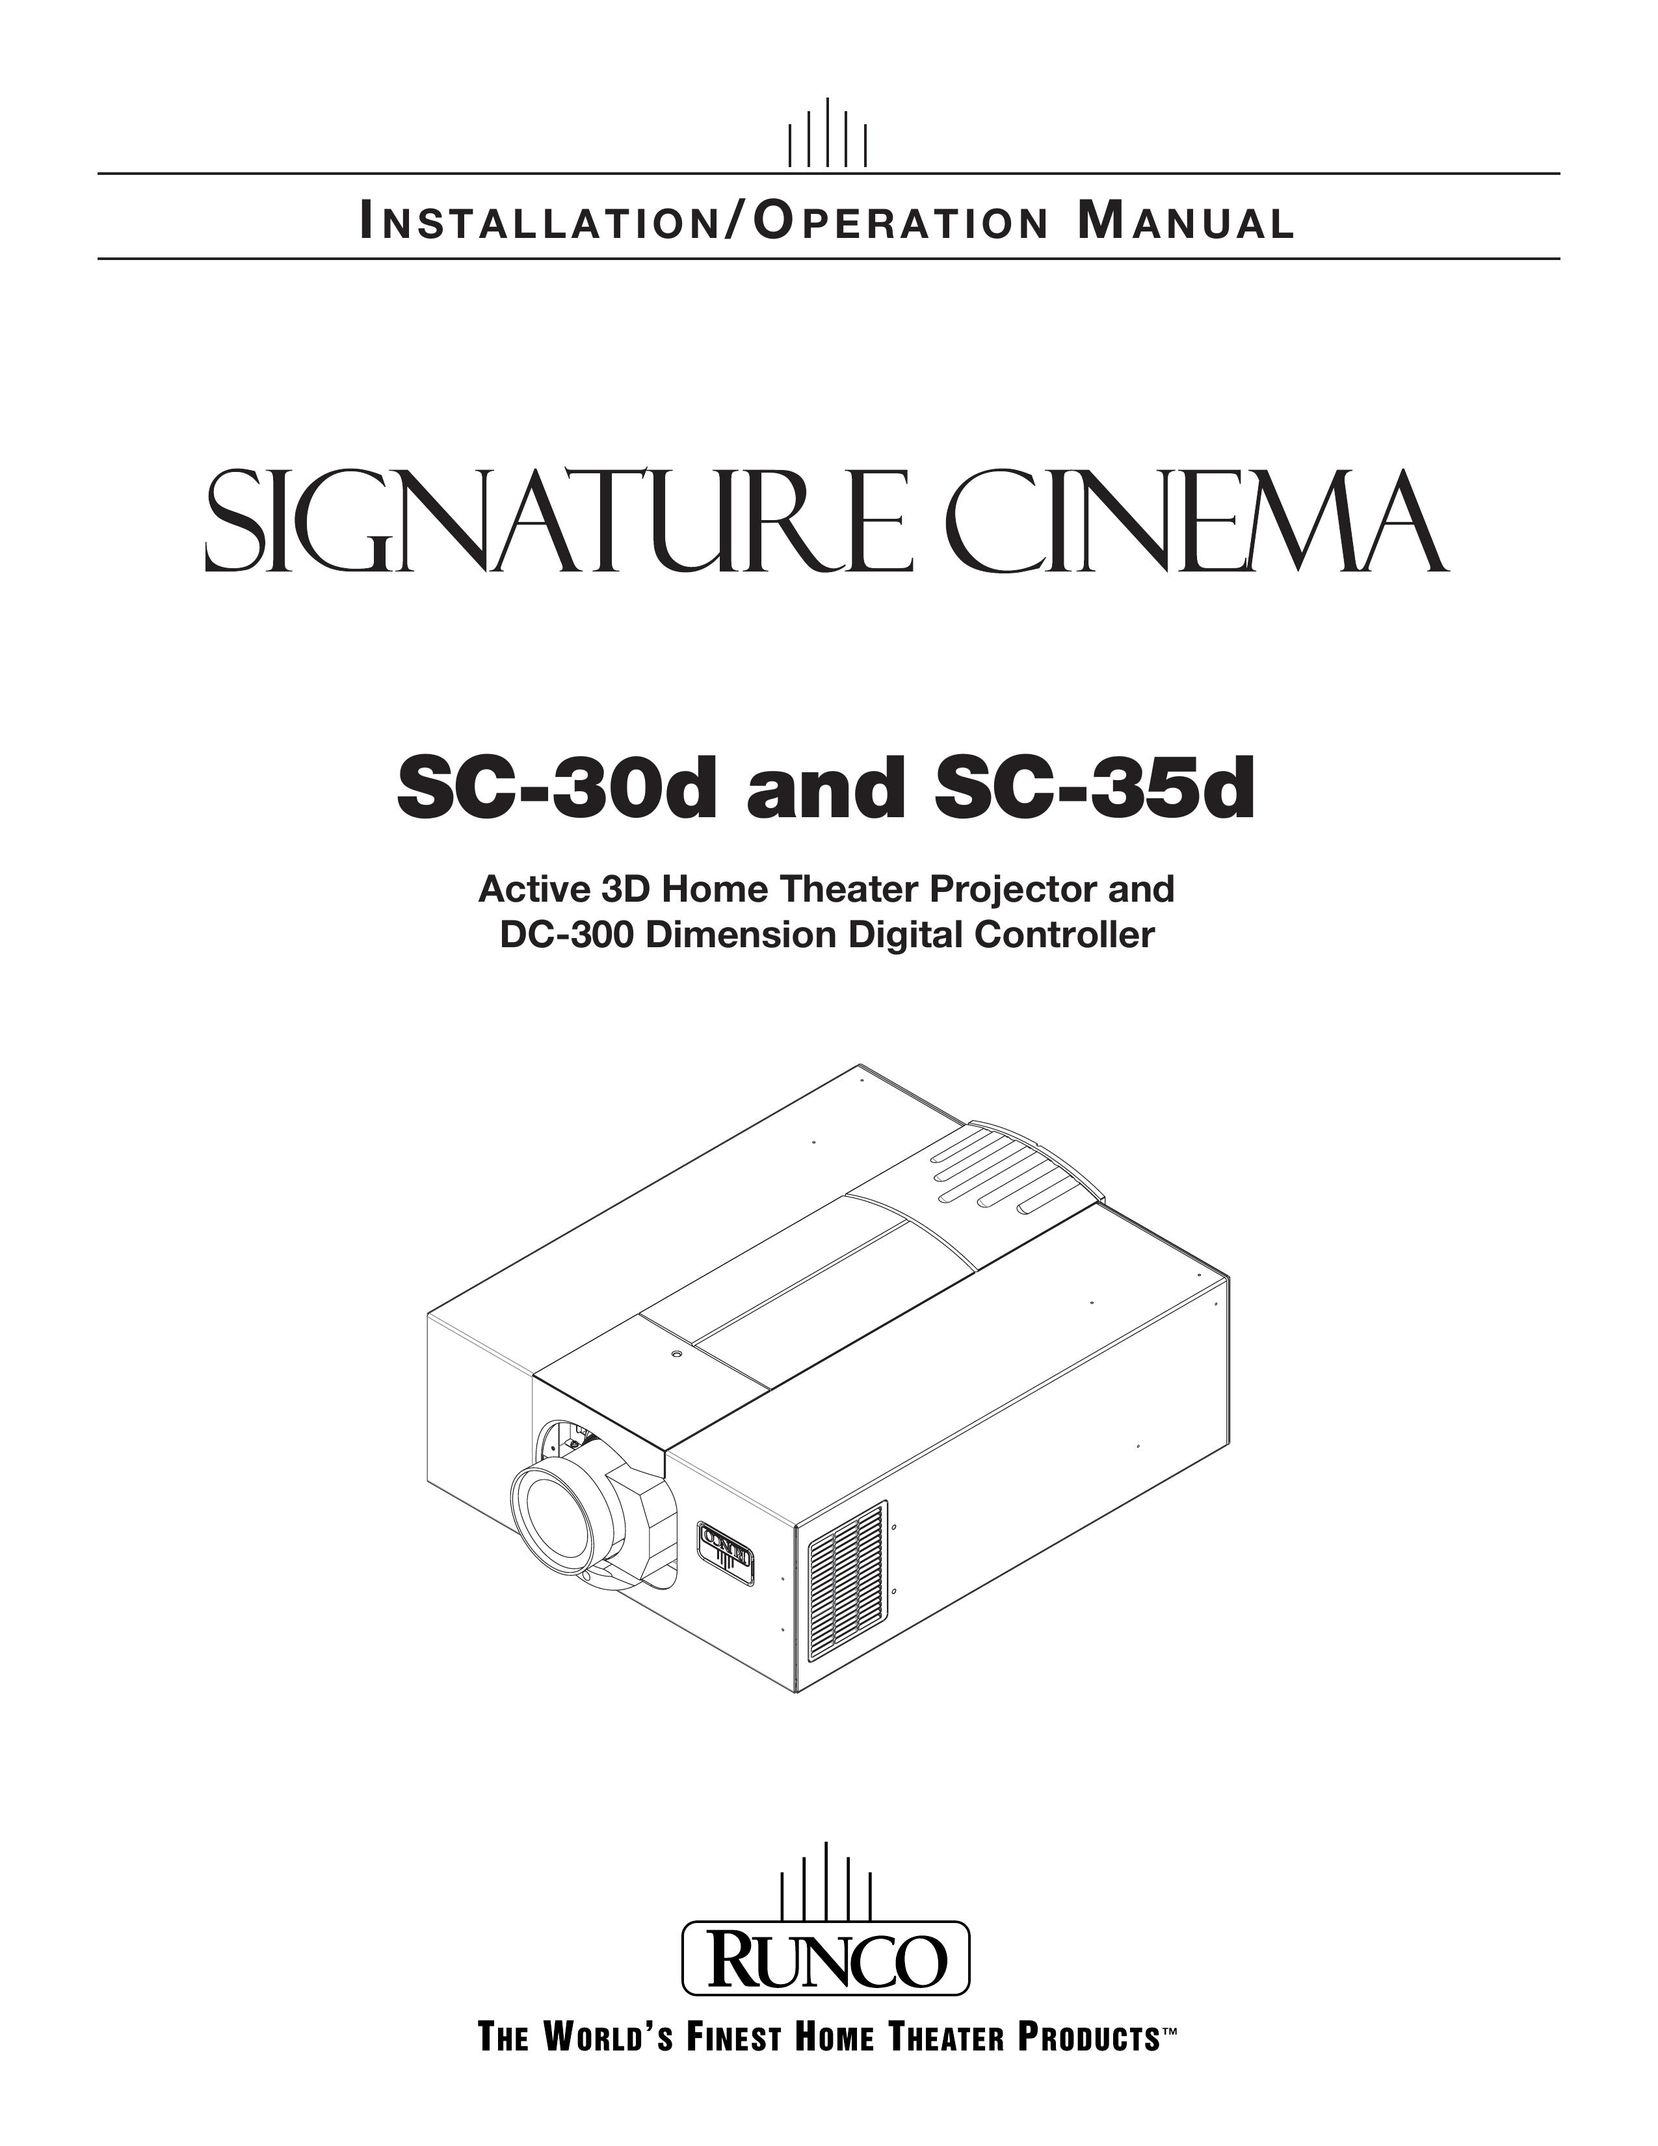 Runco SC-35d Home Theater System User Manual